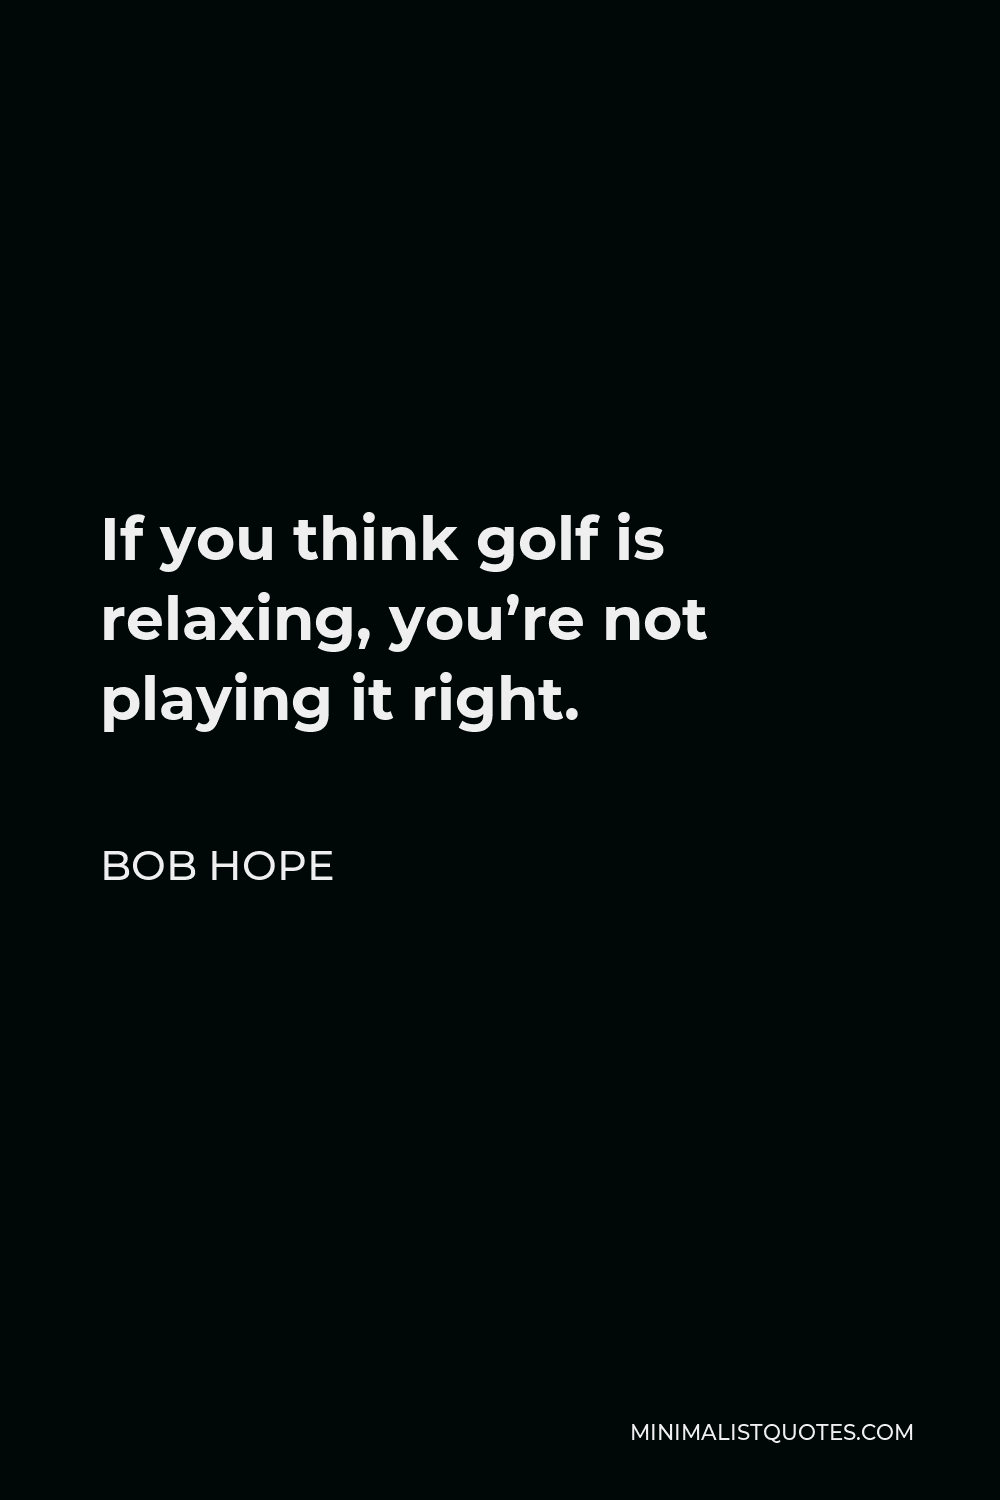 Bob Hope Quote - If you think golf is relaxing, you’re not playing it right.